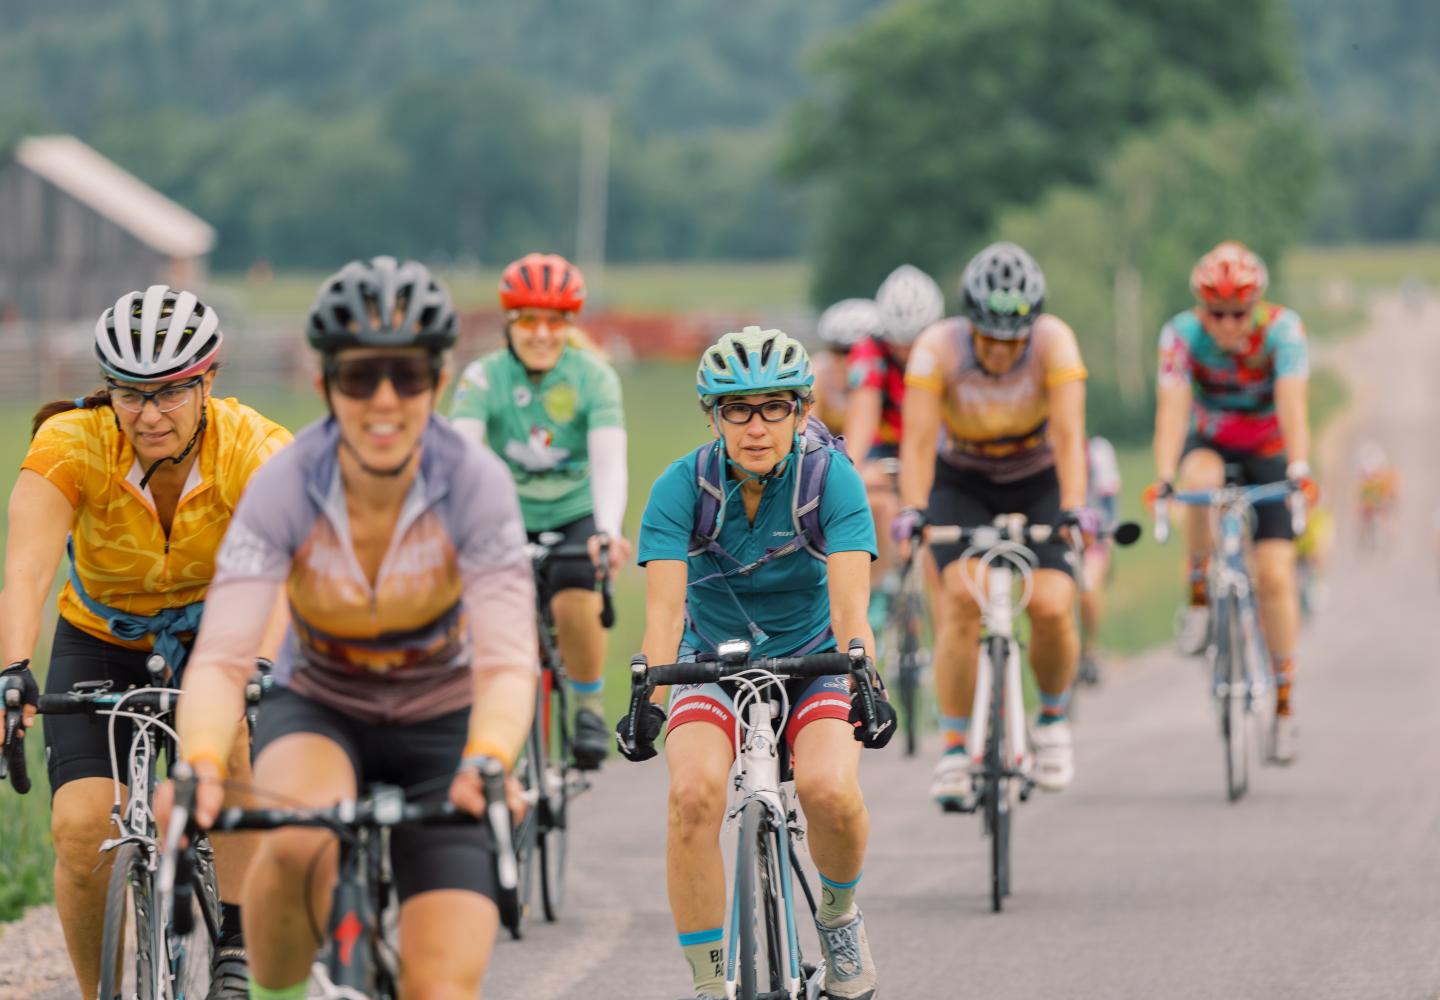 This weekend getaway pairs some of the most stunning road cycling in the Adirondacks with delicious local dining in postcard perfect Saranac Lake, a community filled with quirky shops, art galleries and stunning architecture.